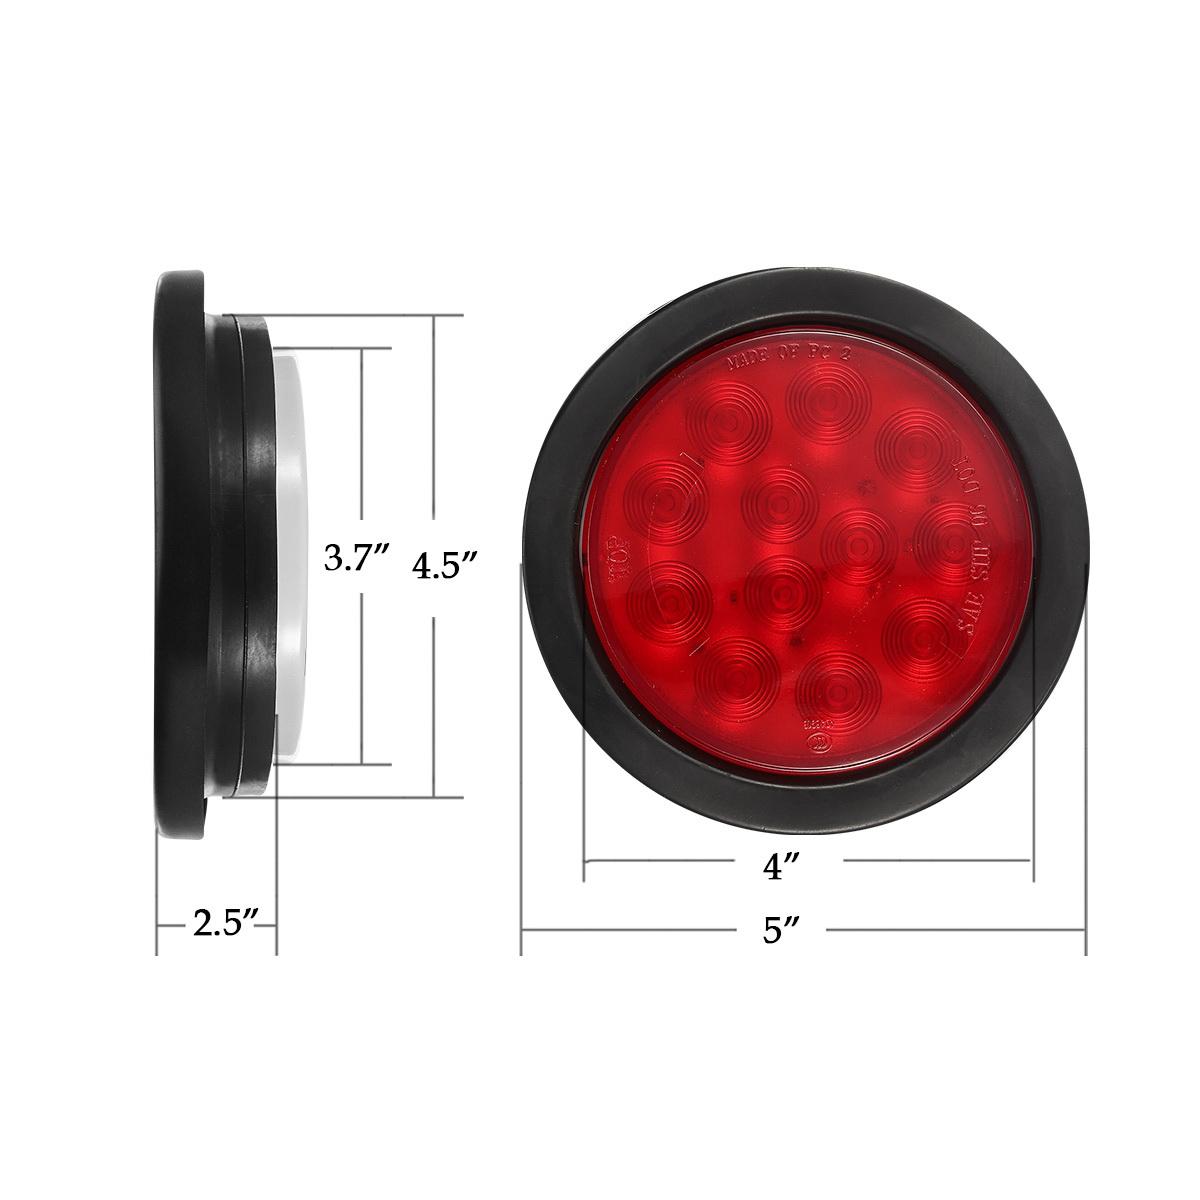 Partsam 4Pcs Inch Round Led Trailer Tail Lights Kit Red 12 LED 12V  Waterproof for Truck RV Boat